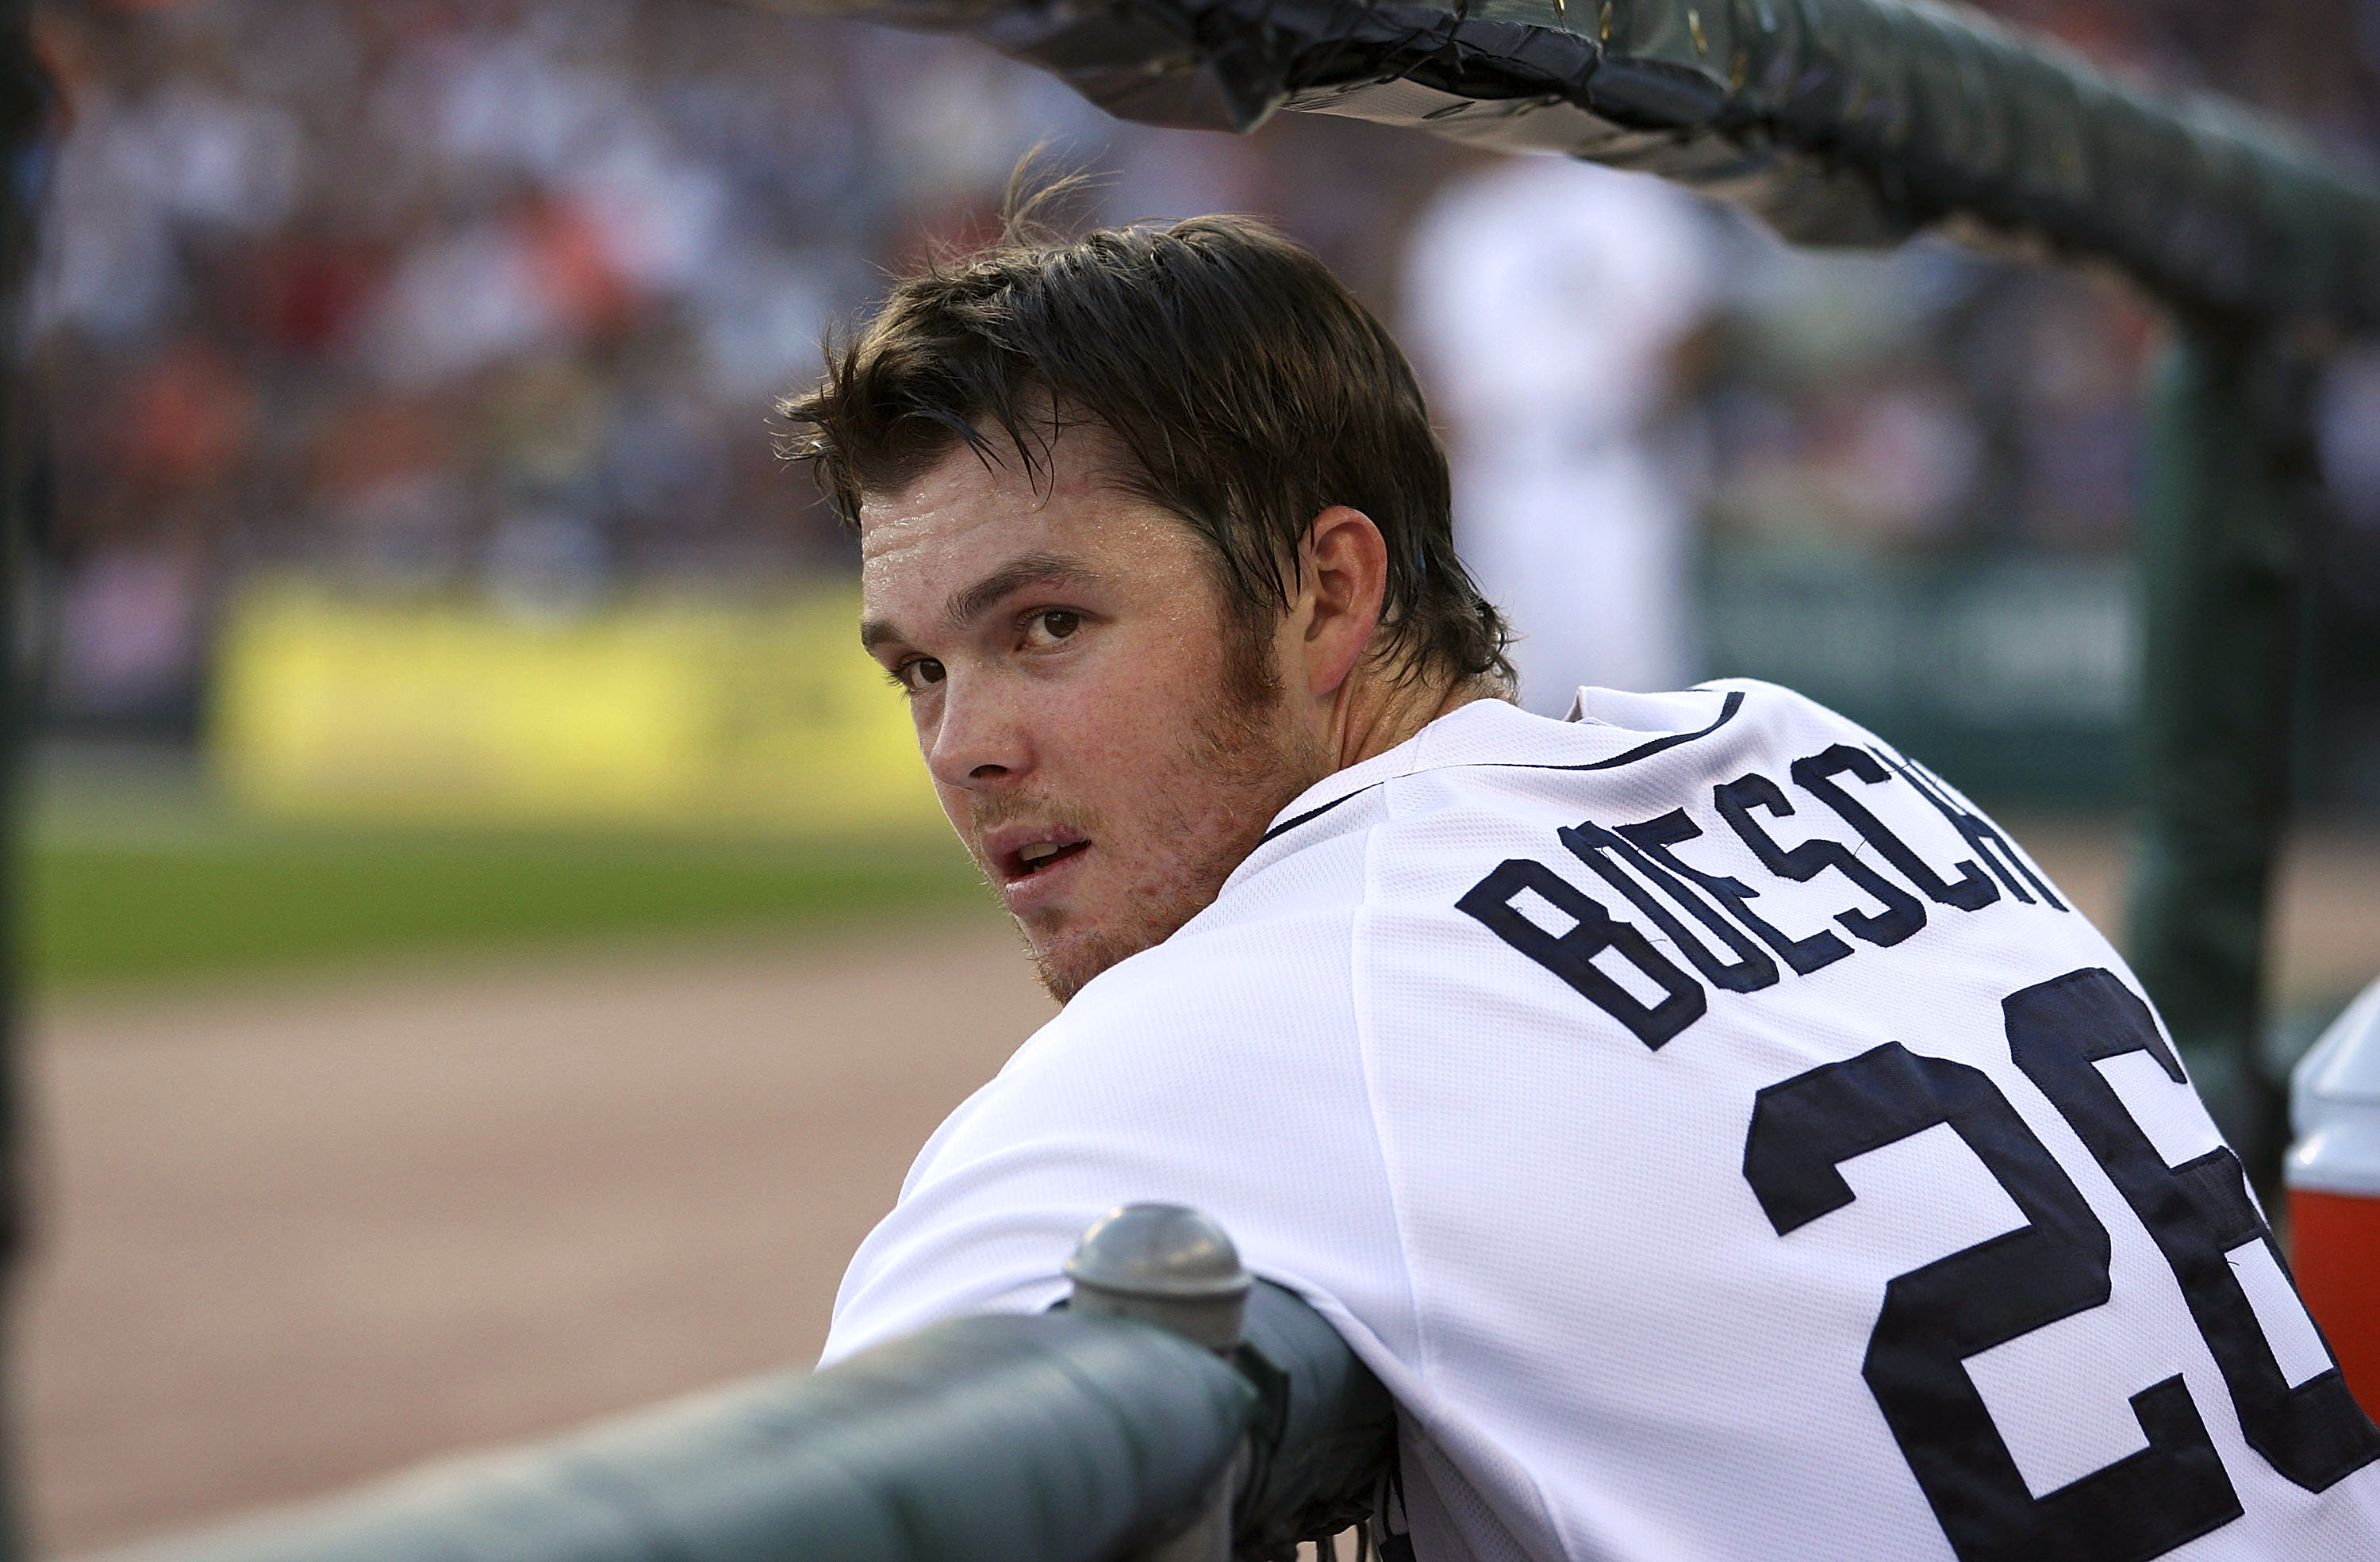 DETROIT - JULY 02:  Brennan Boesch #26 of the Detroit Tigers watches the action during the third inning of the game against the Seattle Marines on July 2, 2010 at Comerica Park in Detroit, Michigan. The Tigers defeated the Mariners 7-1.   (Photo by Leon H